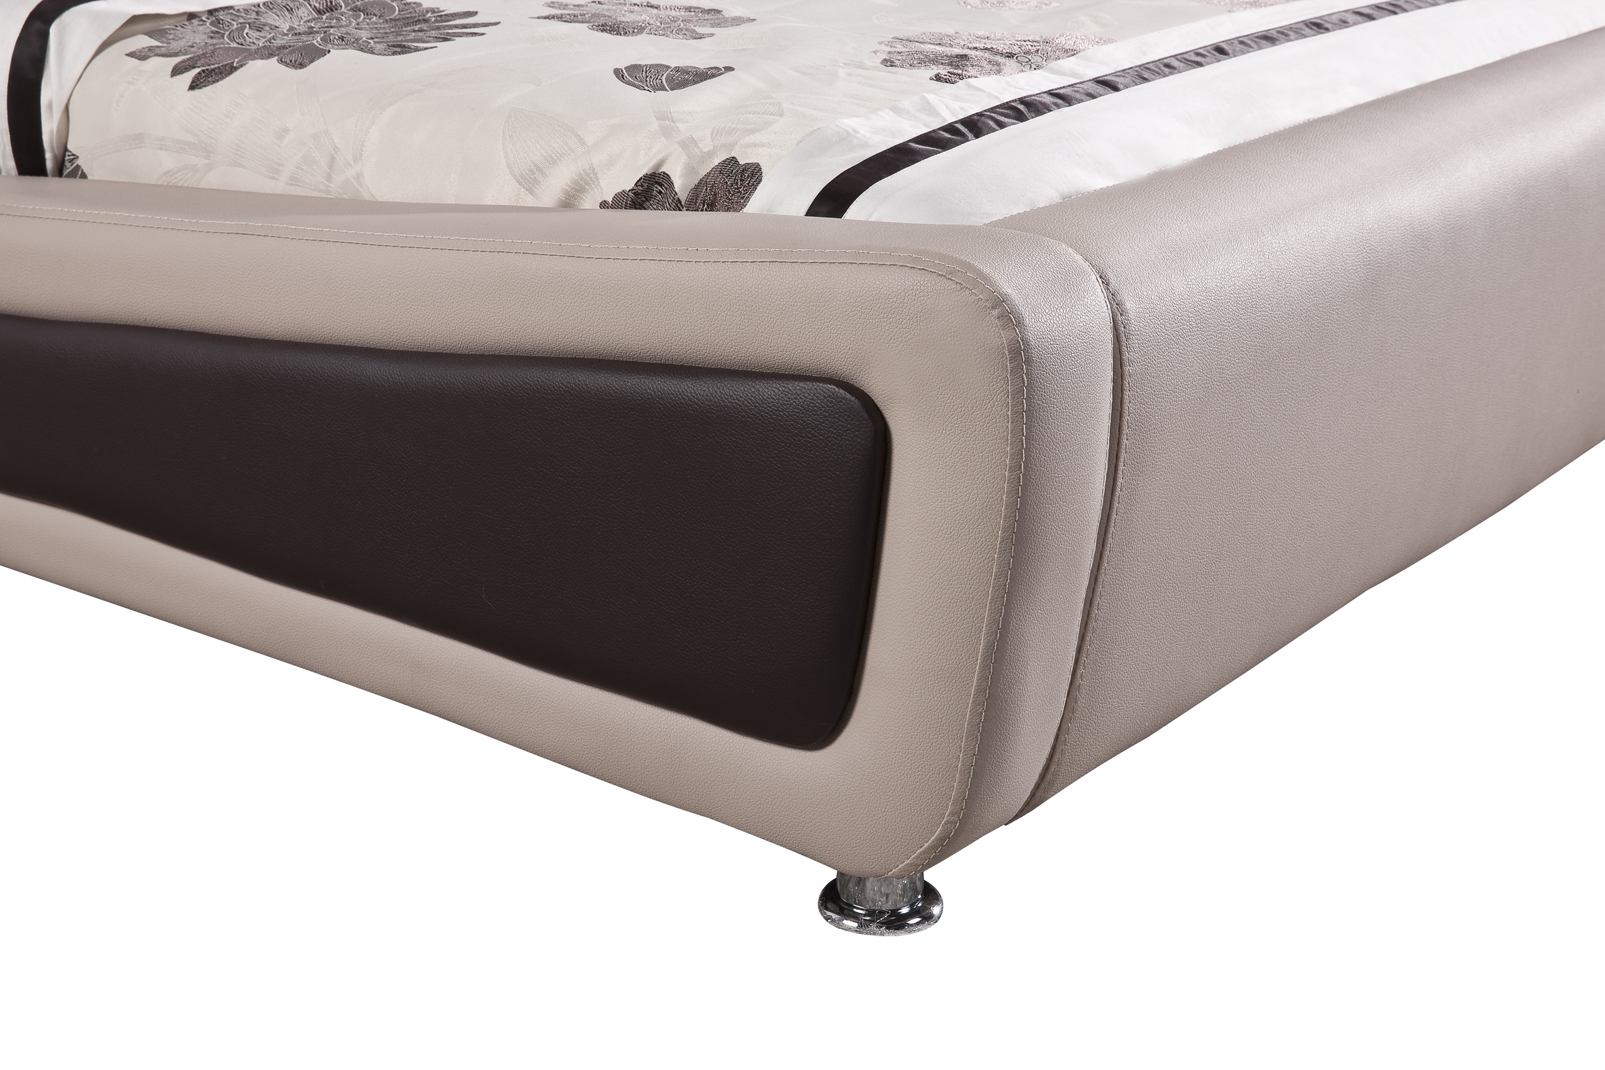 Olivia Contemporary Button Tufted Faux Leather Platform Bed, Beige/Brown, Eastern King - image 3 of 5